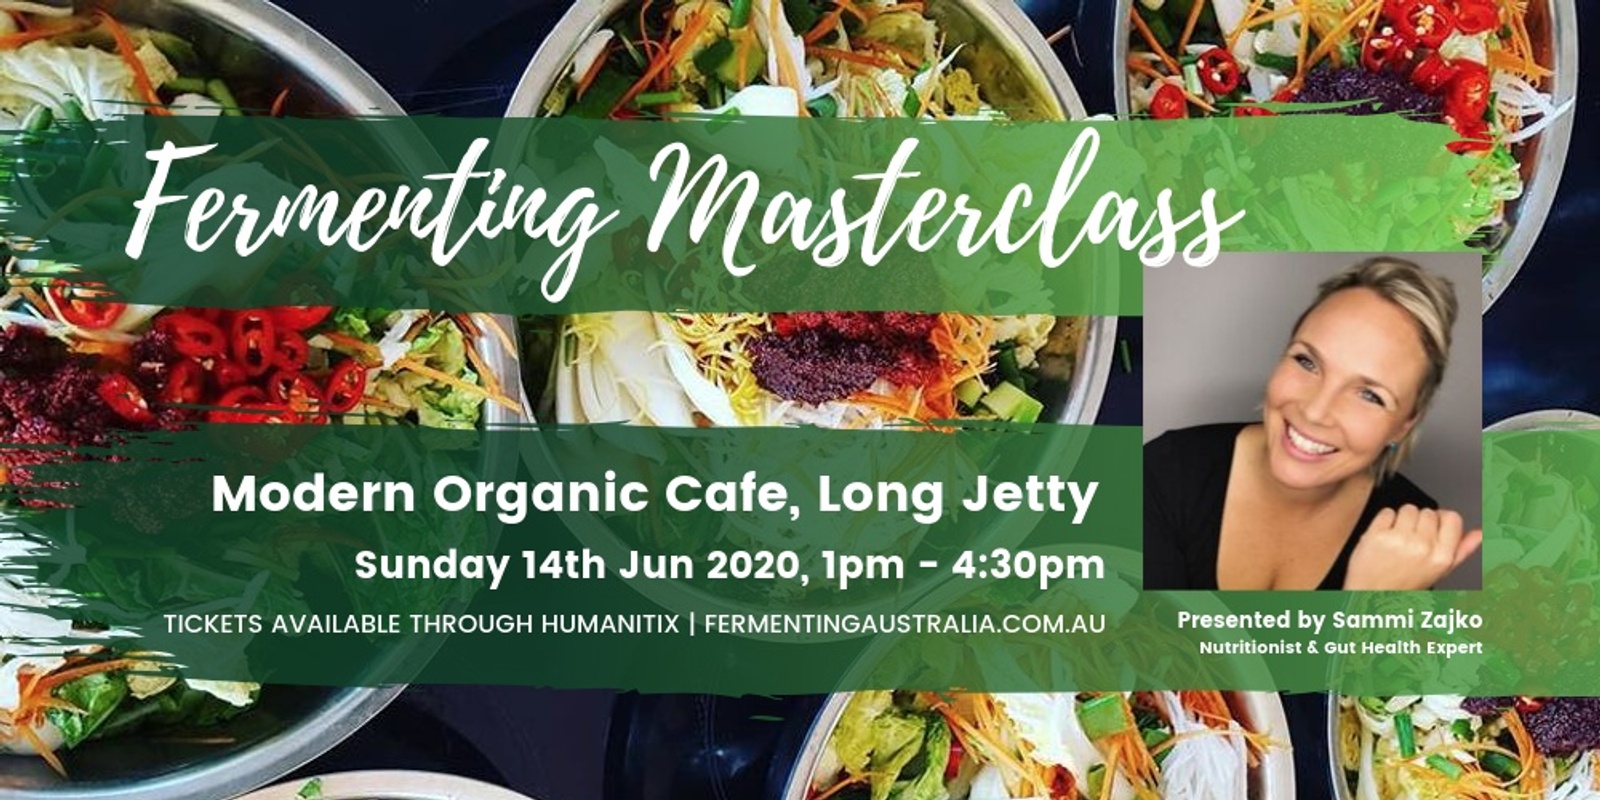 Banner image for June Fermentation Masterclass at Modern Organic Cafe, Long Jetty